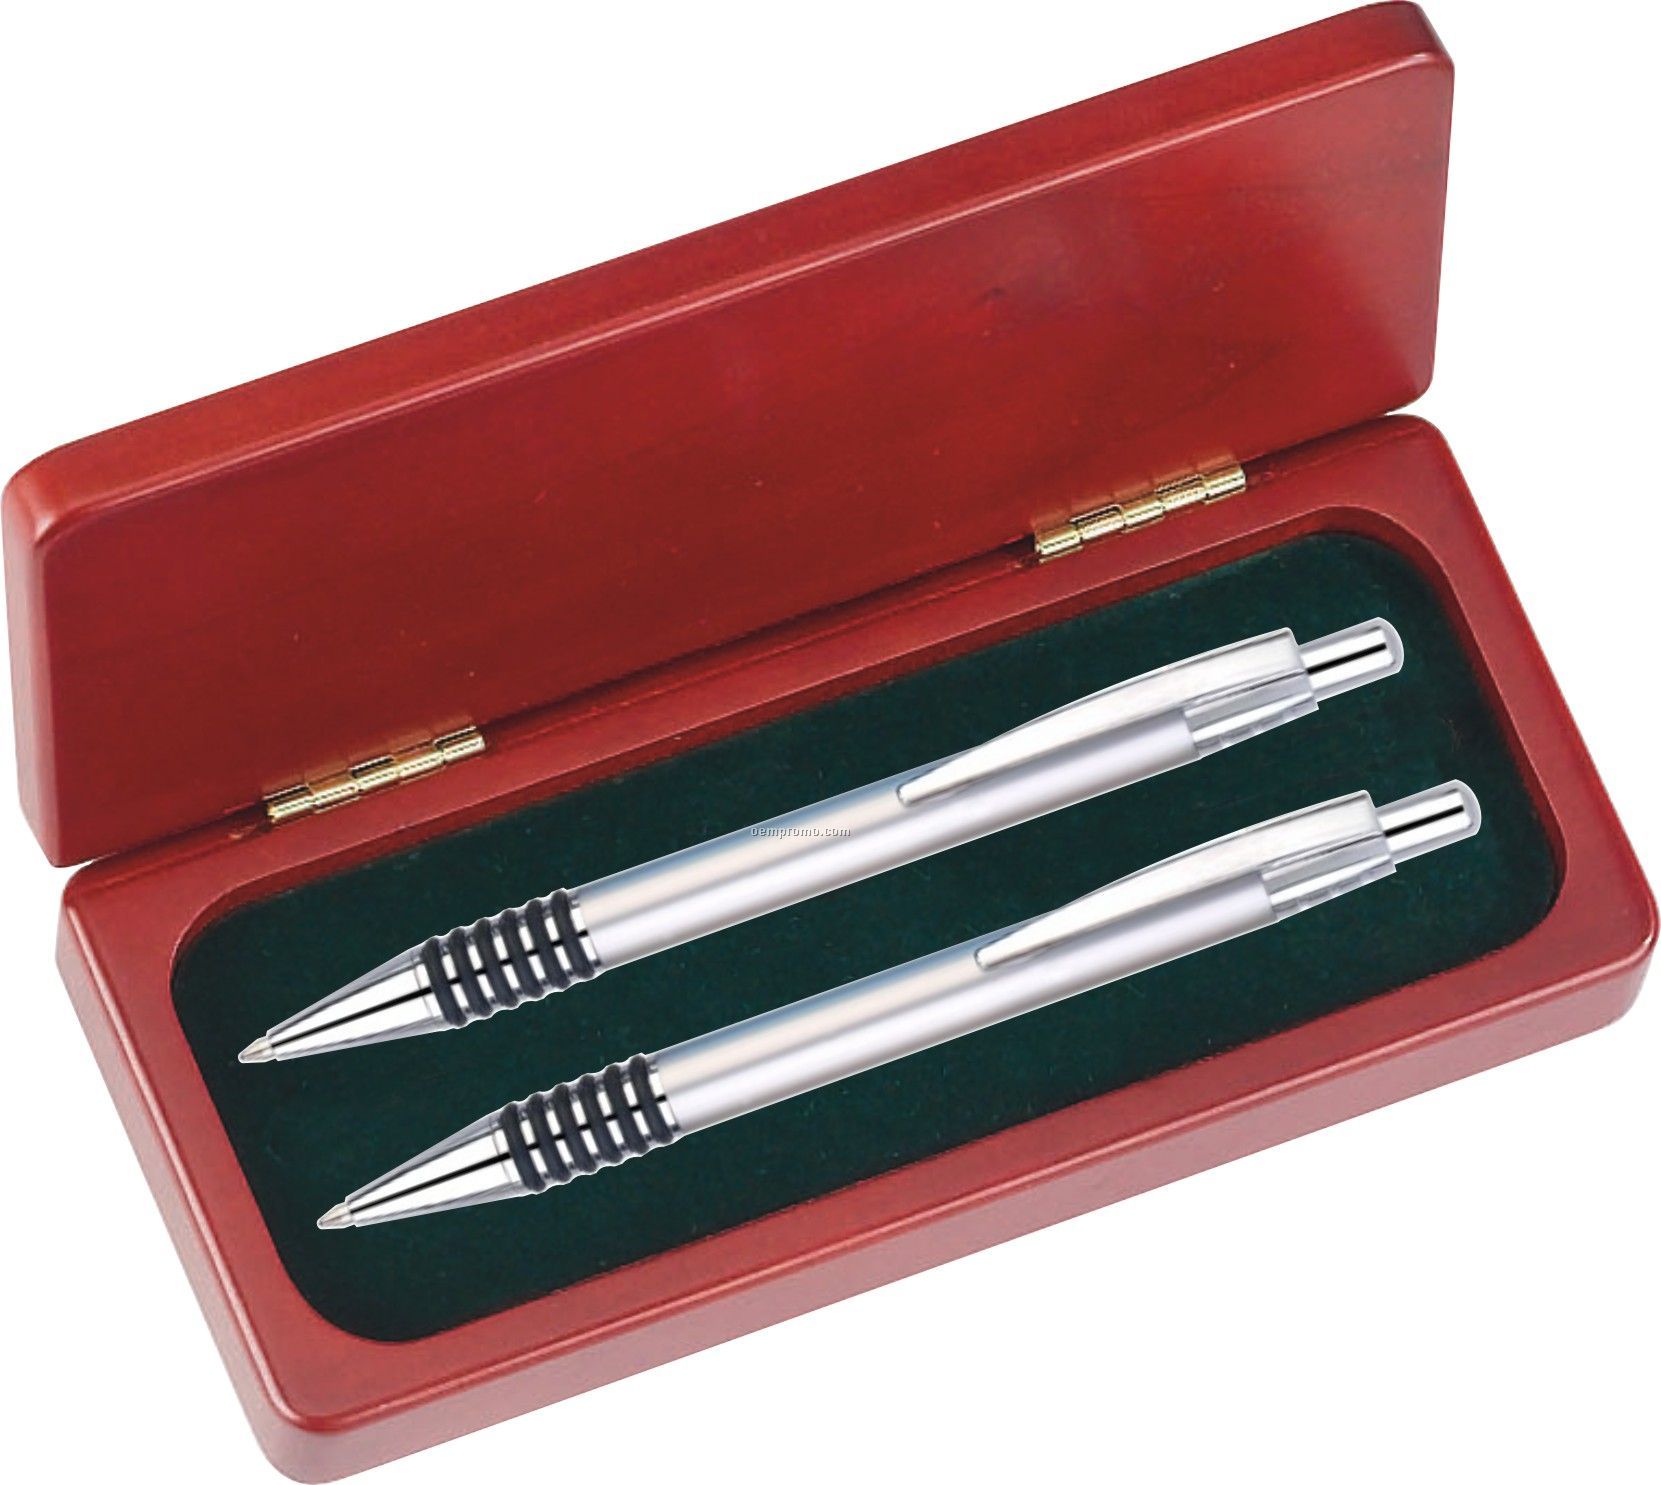 Saturn Series Pen And Mechanical Pencil Gift Set (Silver)